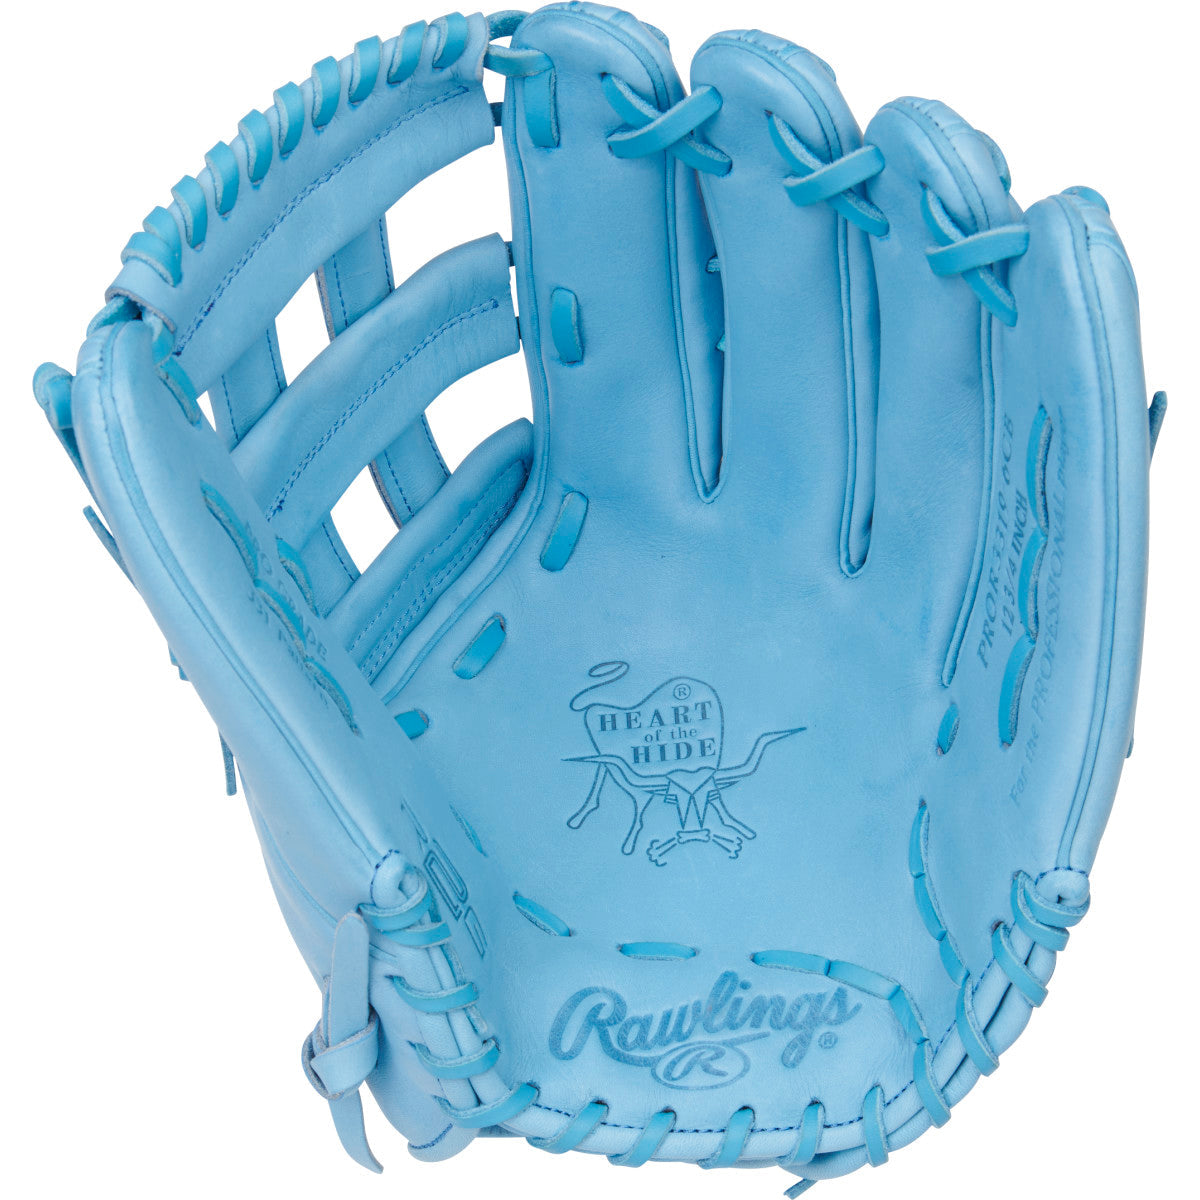 Rawlings Heart of the Hide 12.75" Glove - PROR3319-6CB